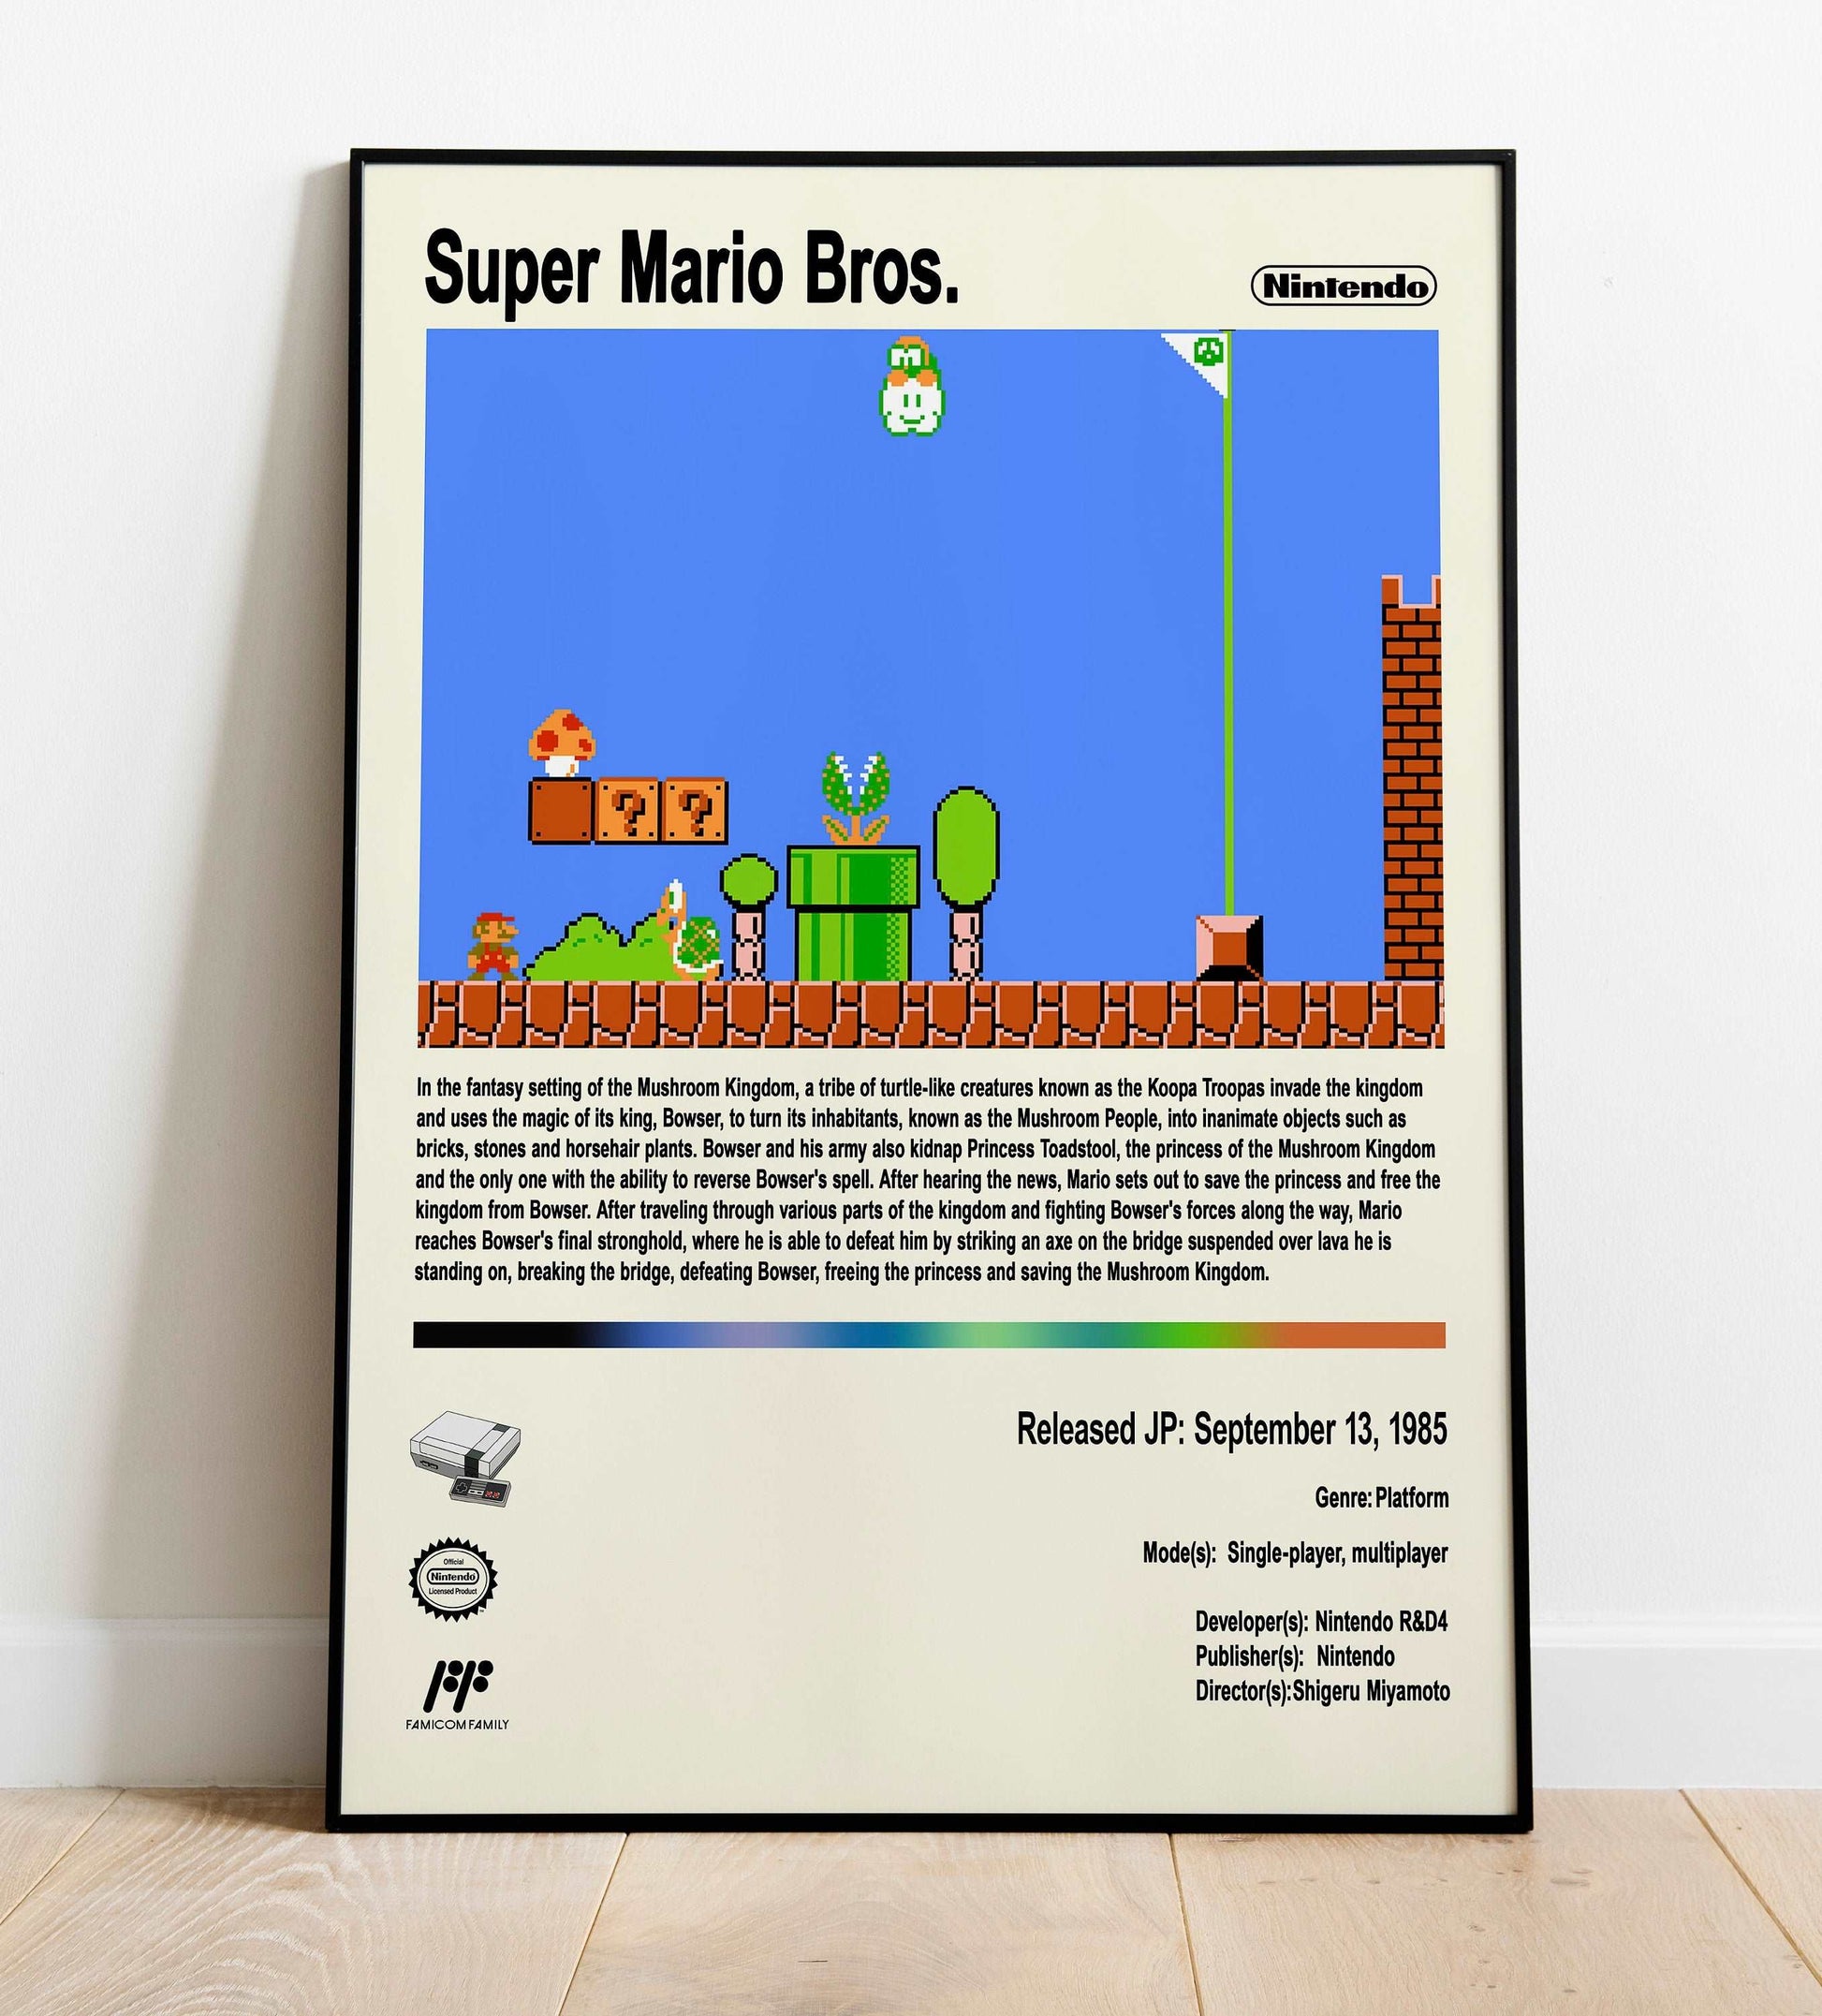 Super Mario Bros Video Game Posters - Poster Kingz